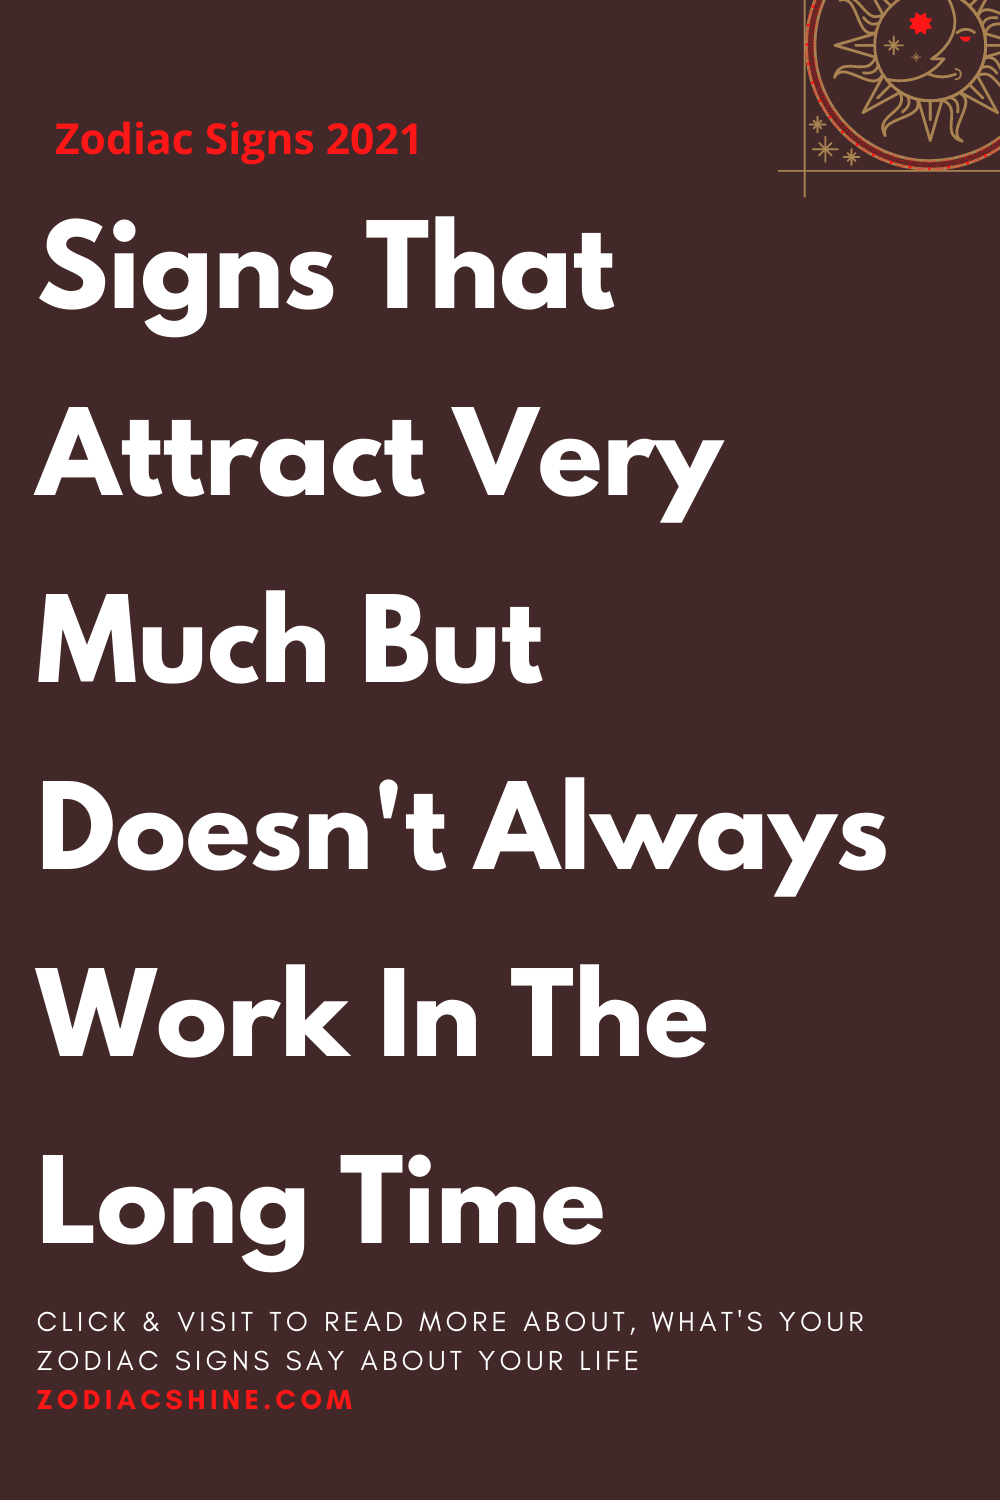 Signs That Attract Very Much But Doesn't Always Work In The Long Time